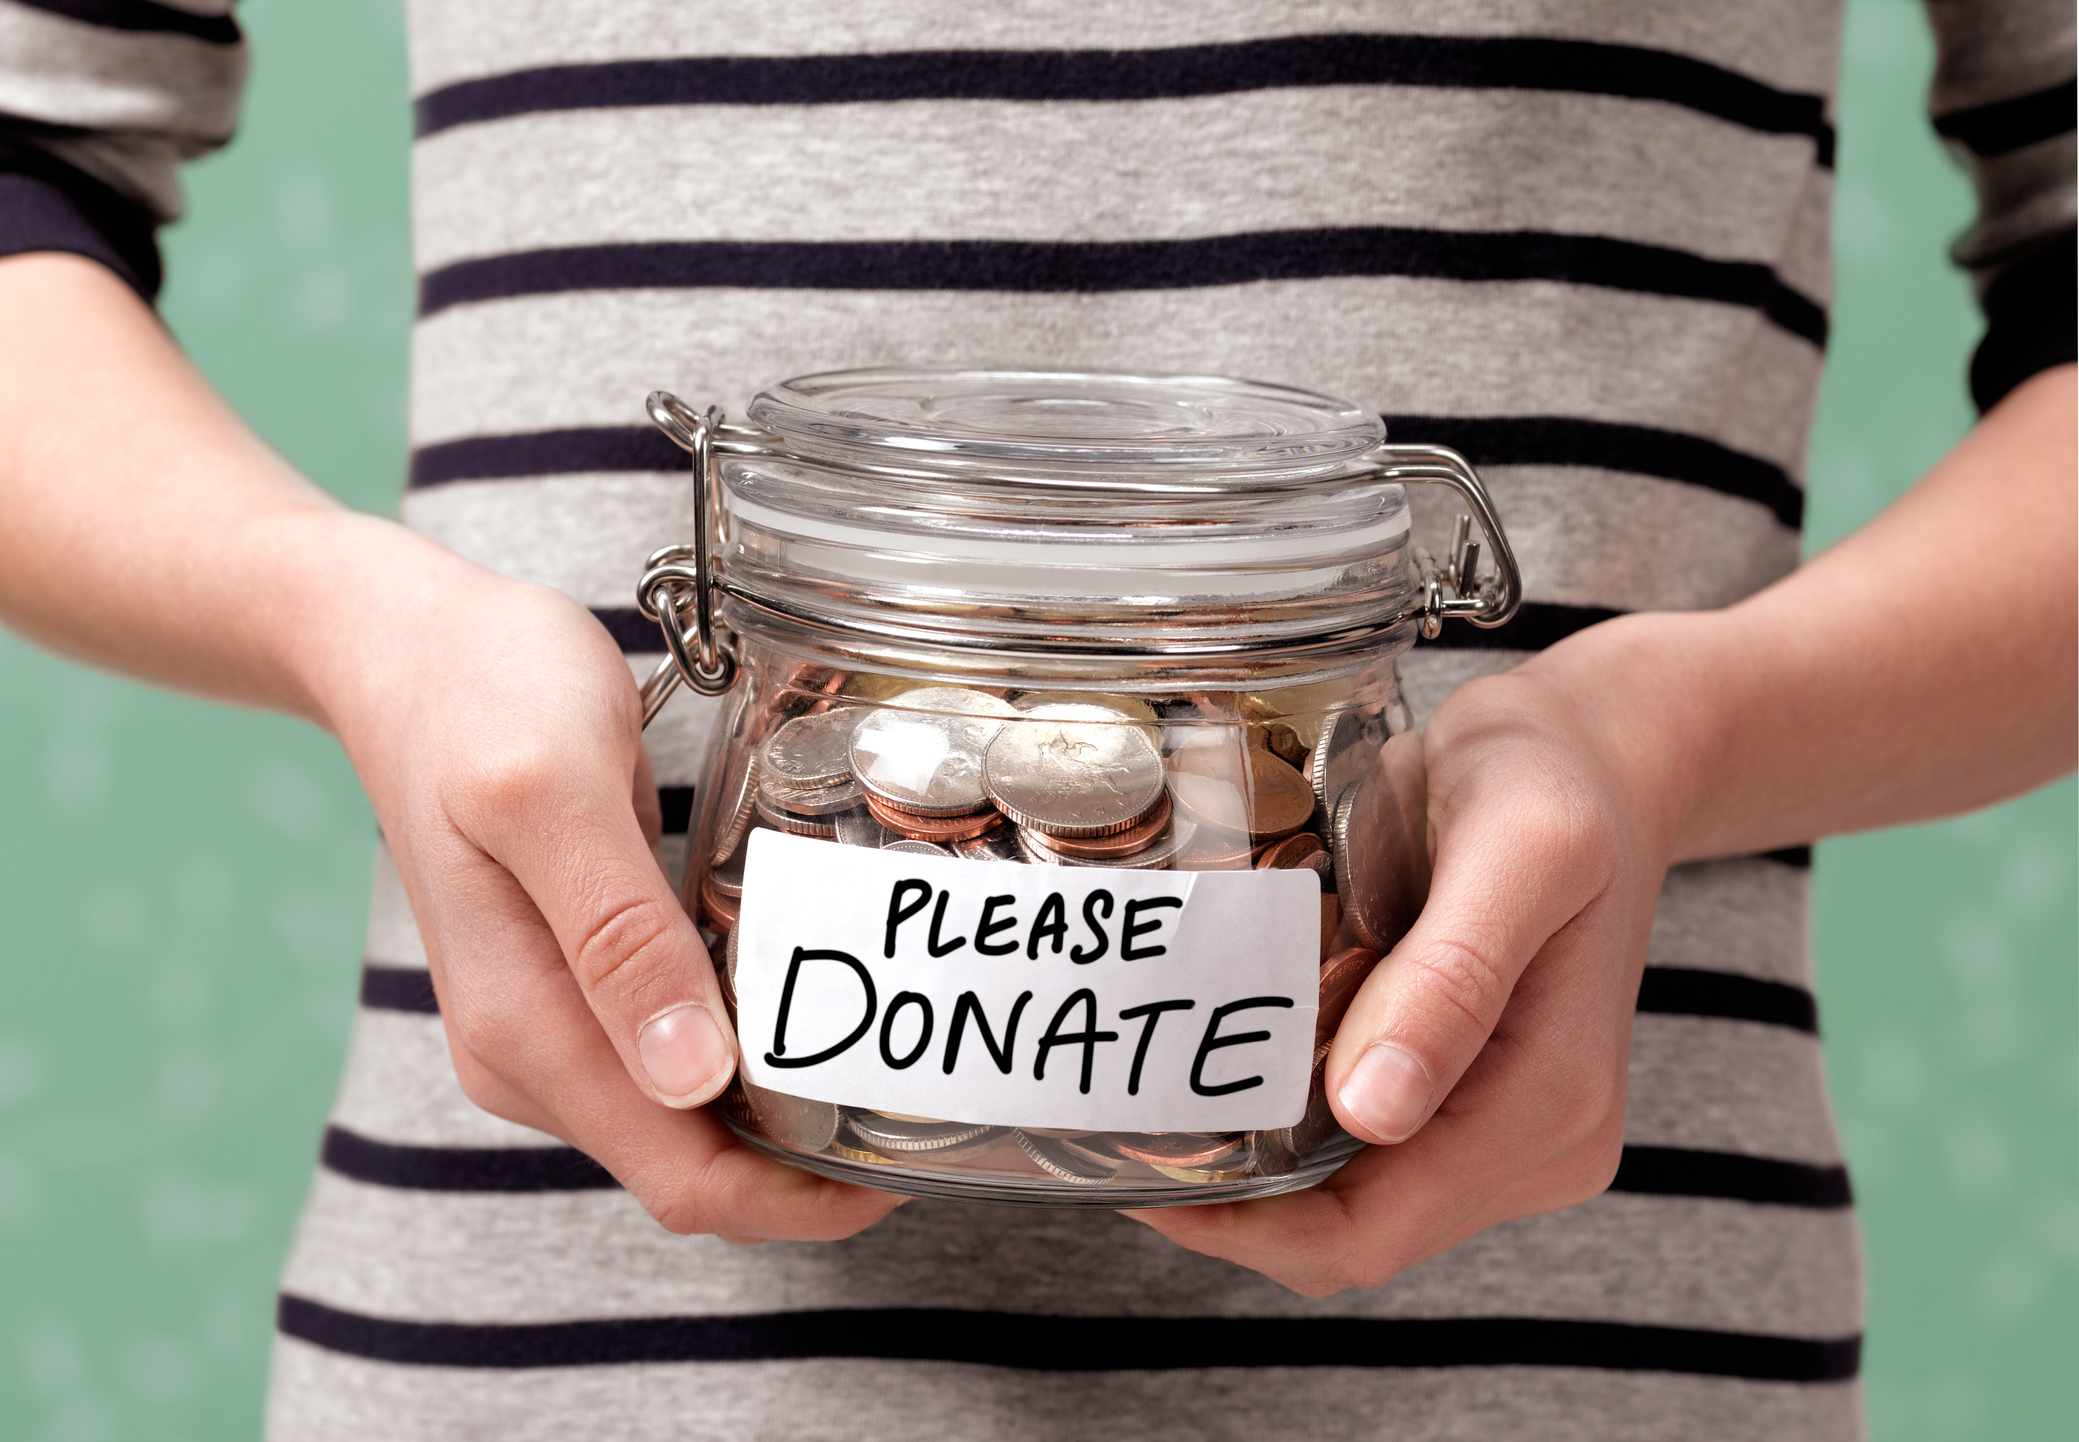 Only Half of American Households Donate to Charity, a New Study Reveals